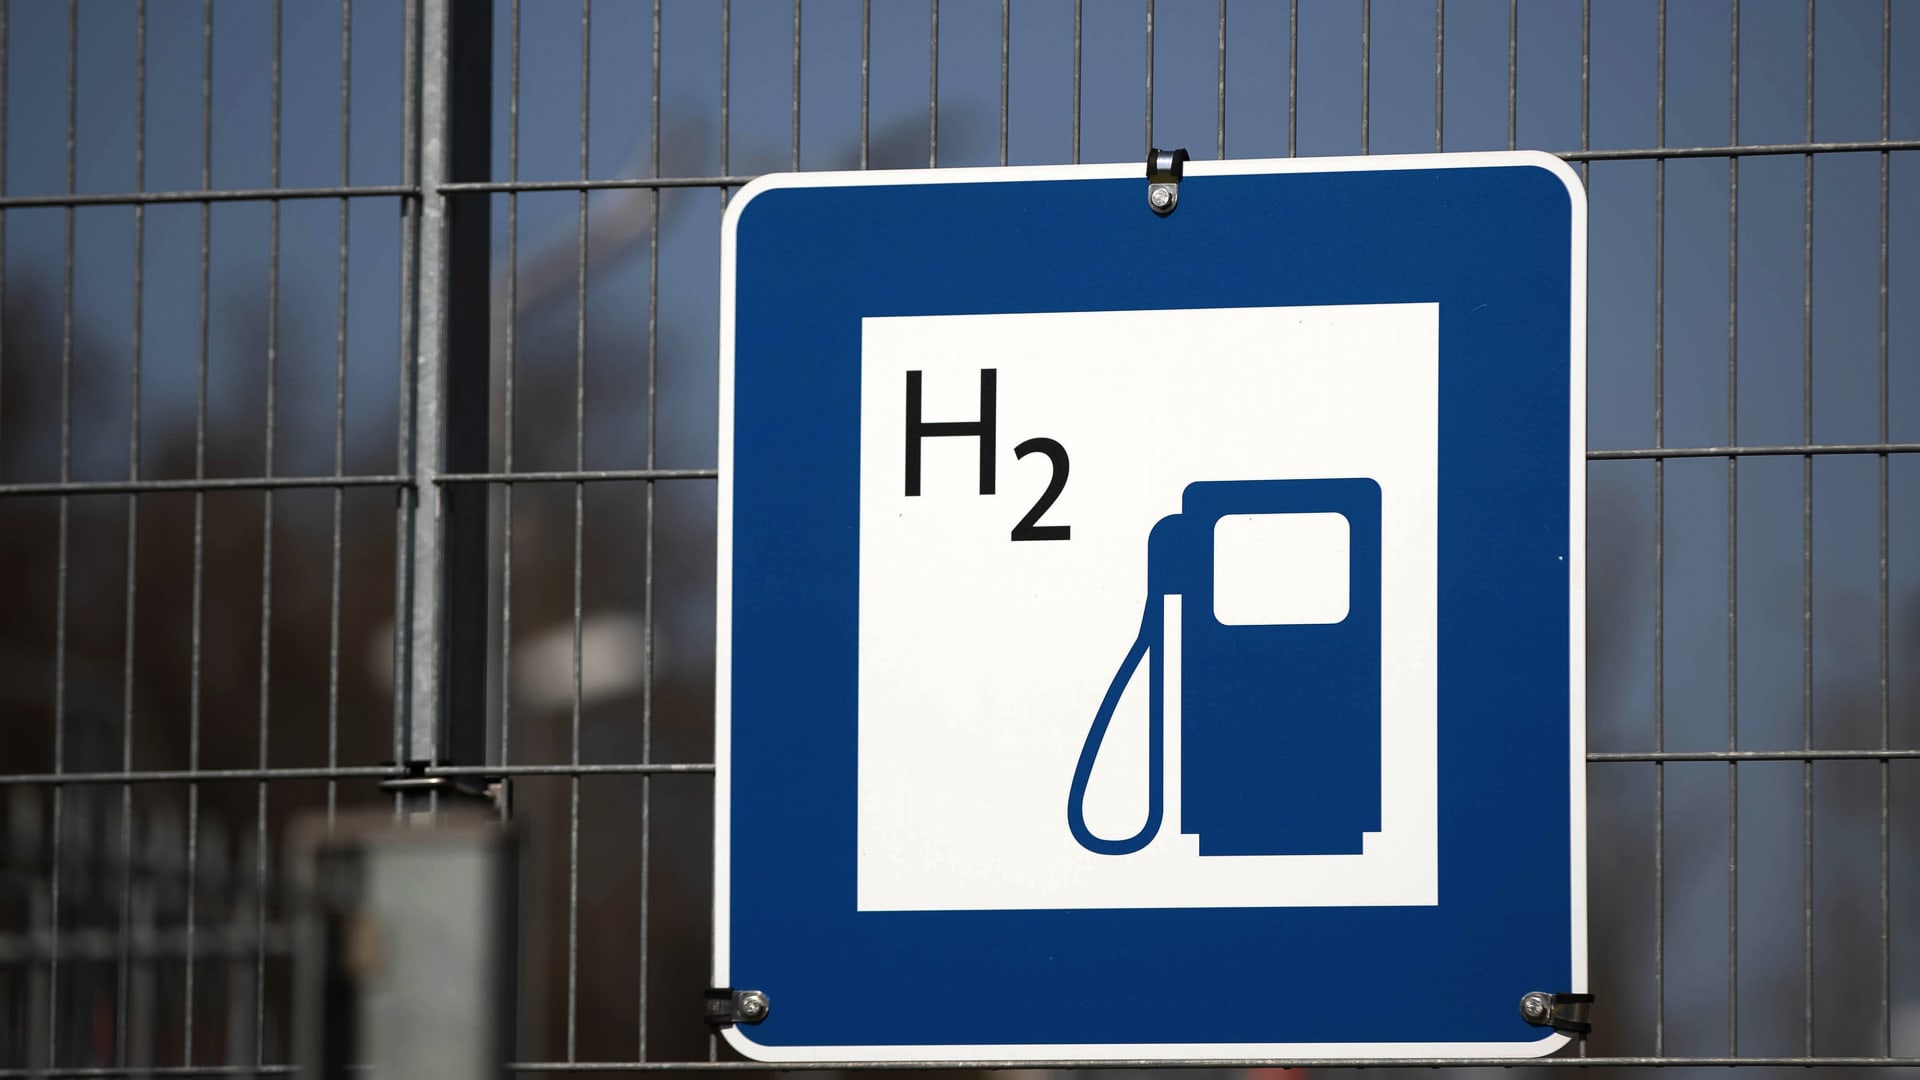 UK plans $95 million hydrogen gigafactory to produce components for vehicles